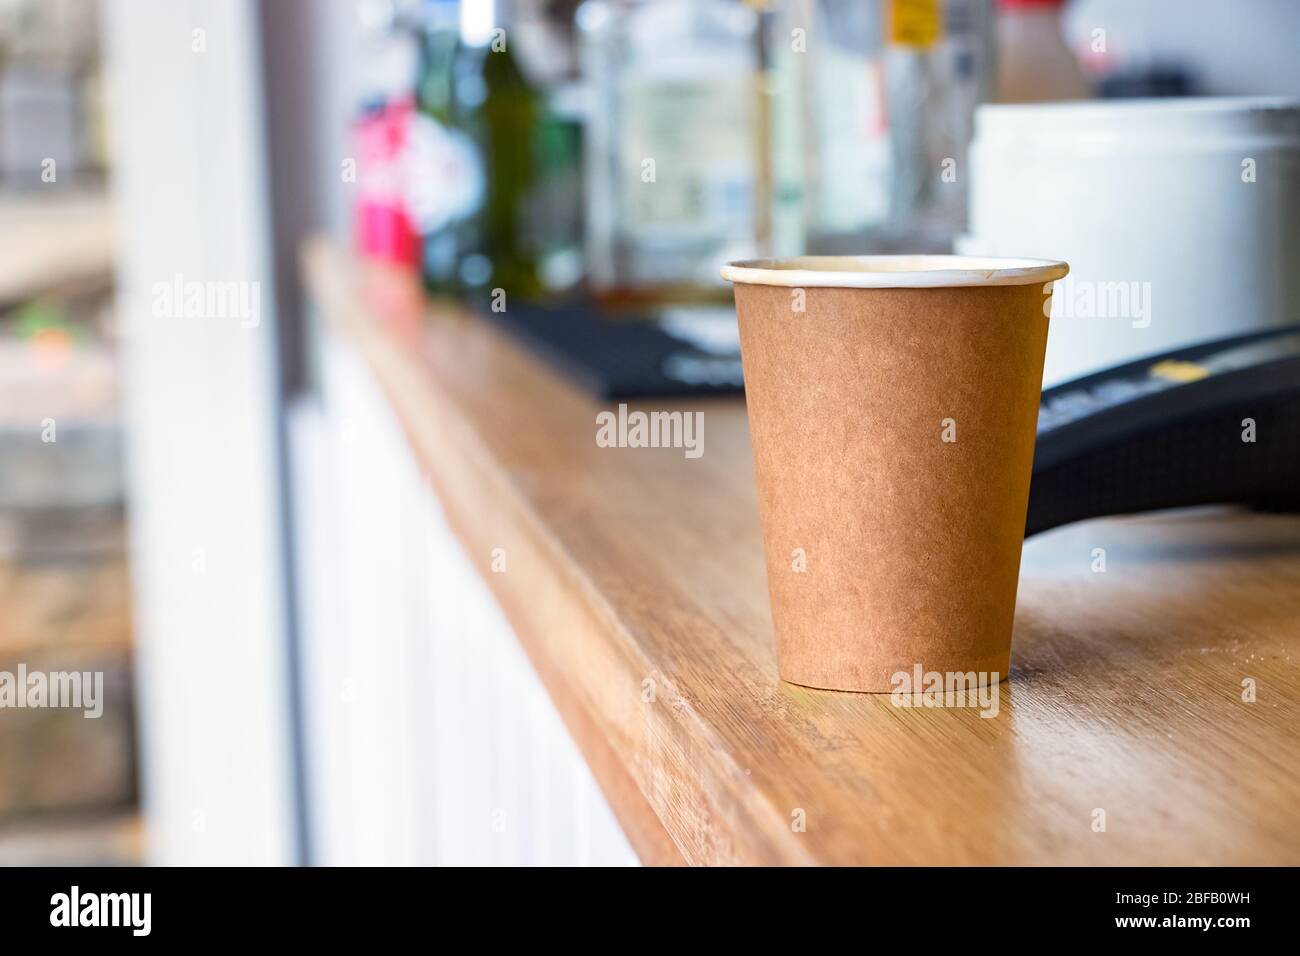 A disposable coffee cup made of recycled paper on coffee shop counter. Stock Photo